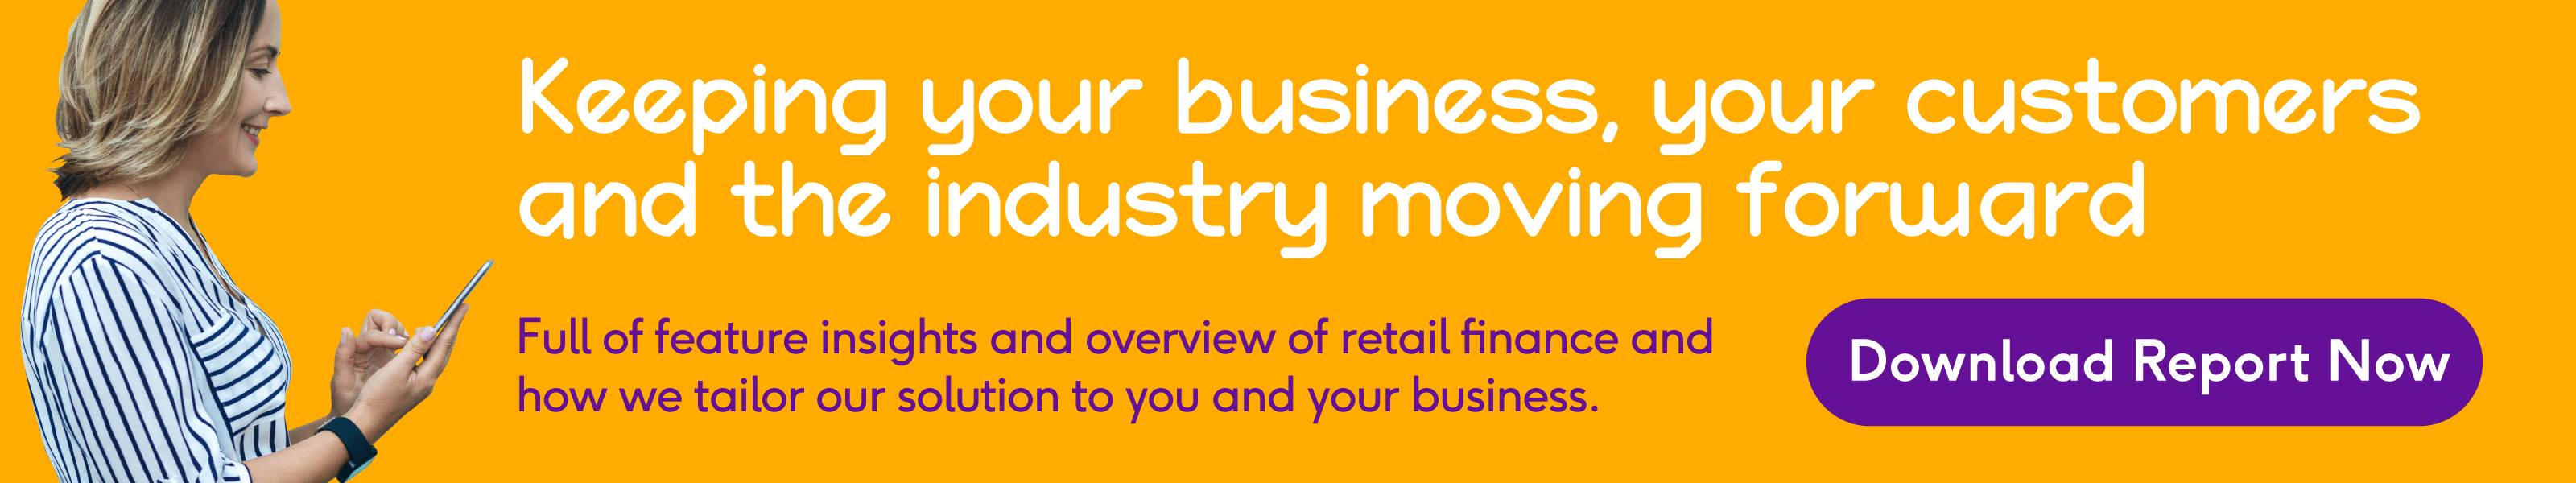 Keeping Your Business, Your Customers and the Industry Moving Forward - Download Report Now